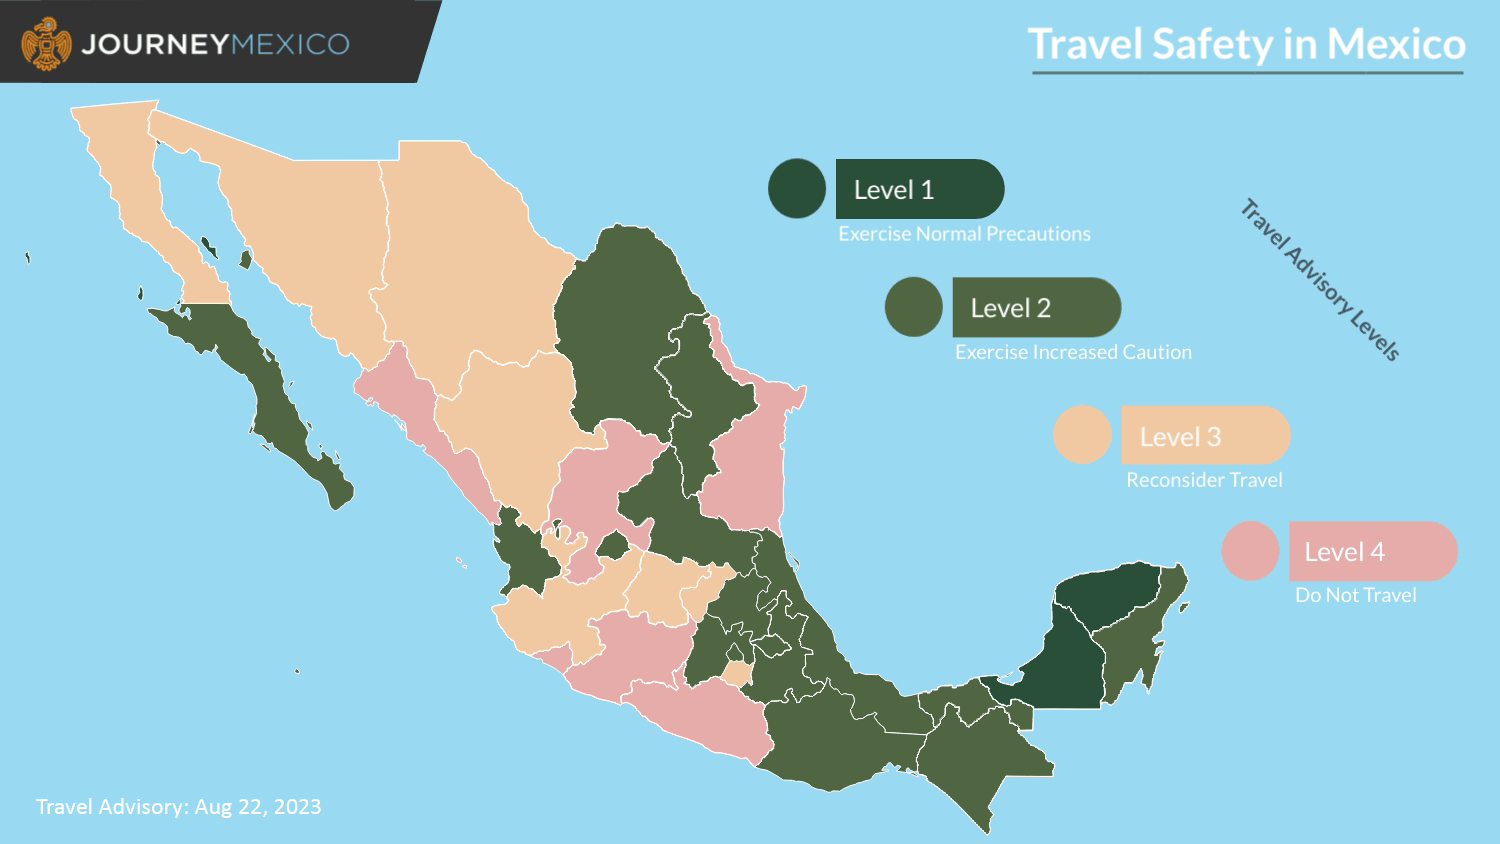 Mexico Travel Safety 2023 